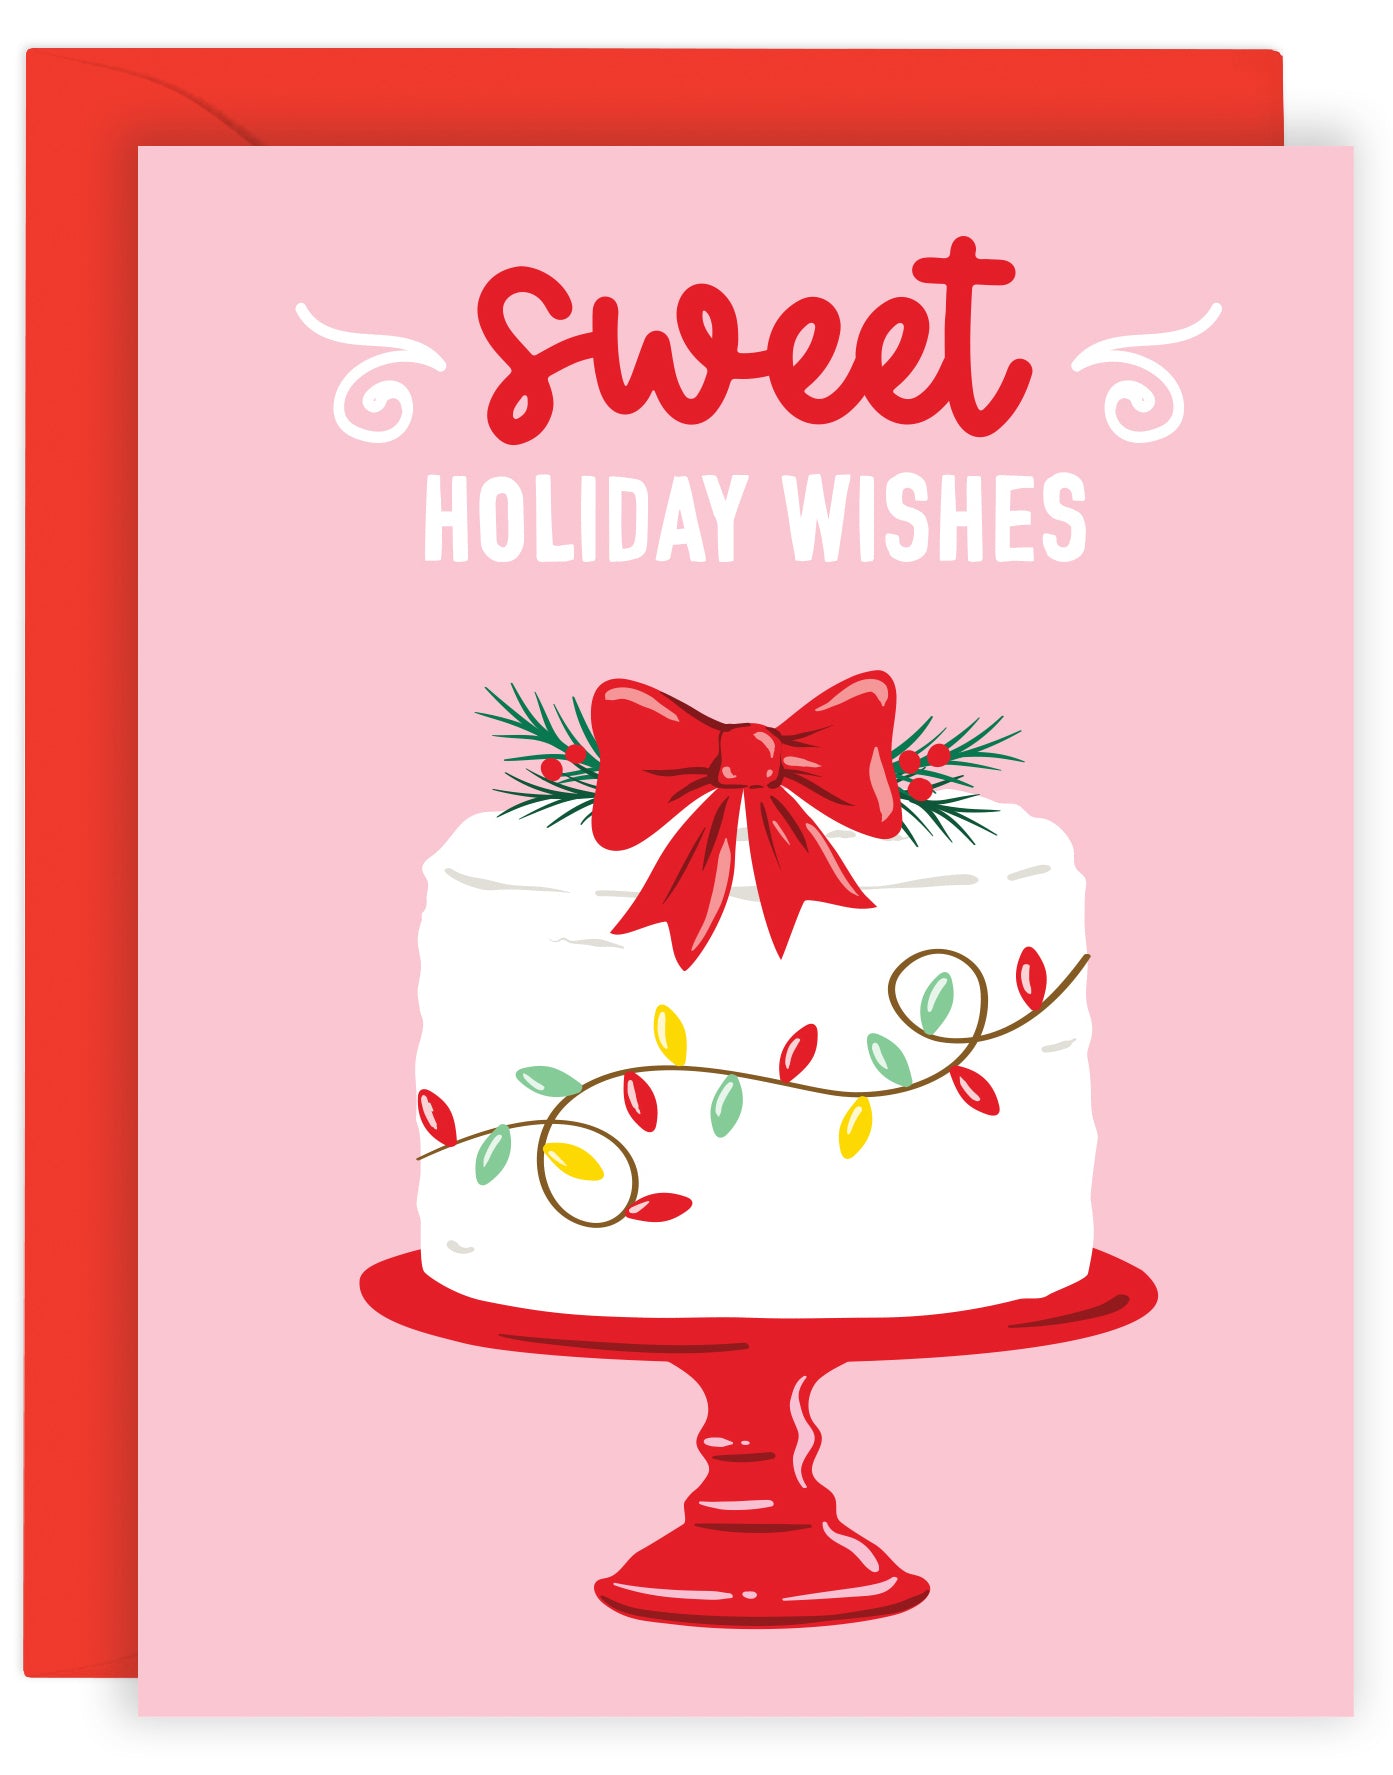 SWEET HOLIDAY WISHES